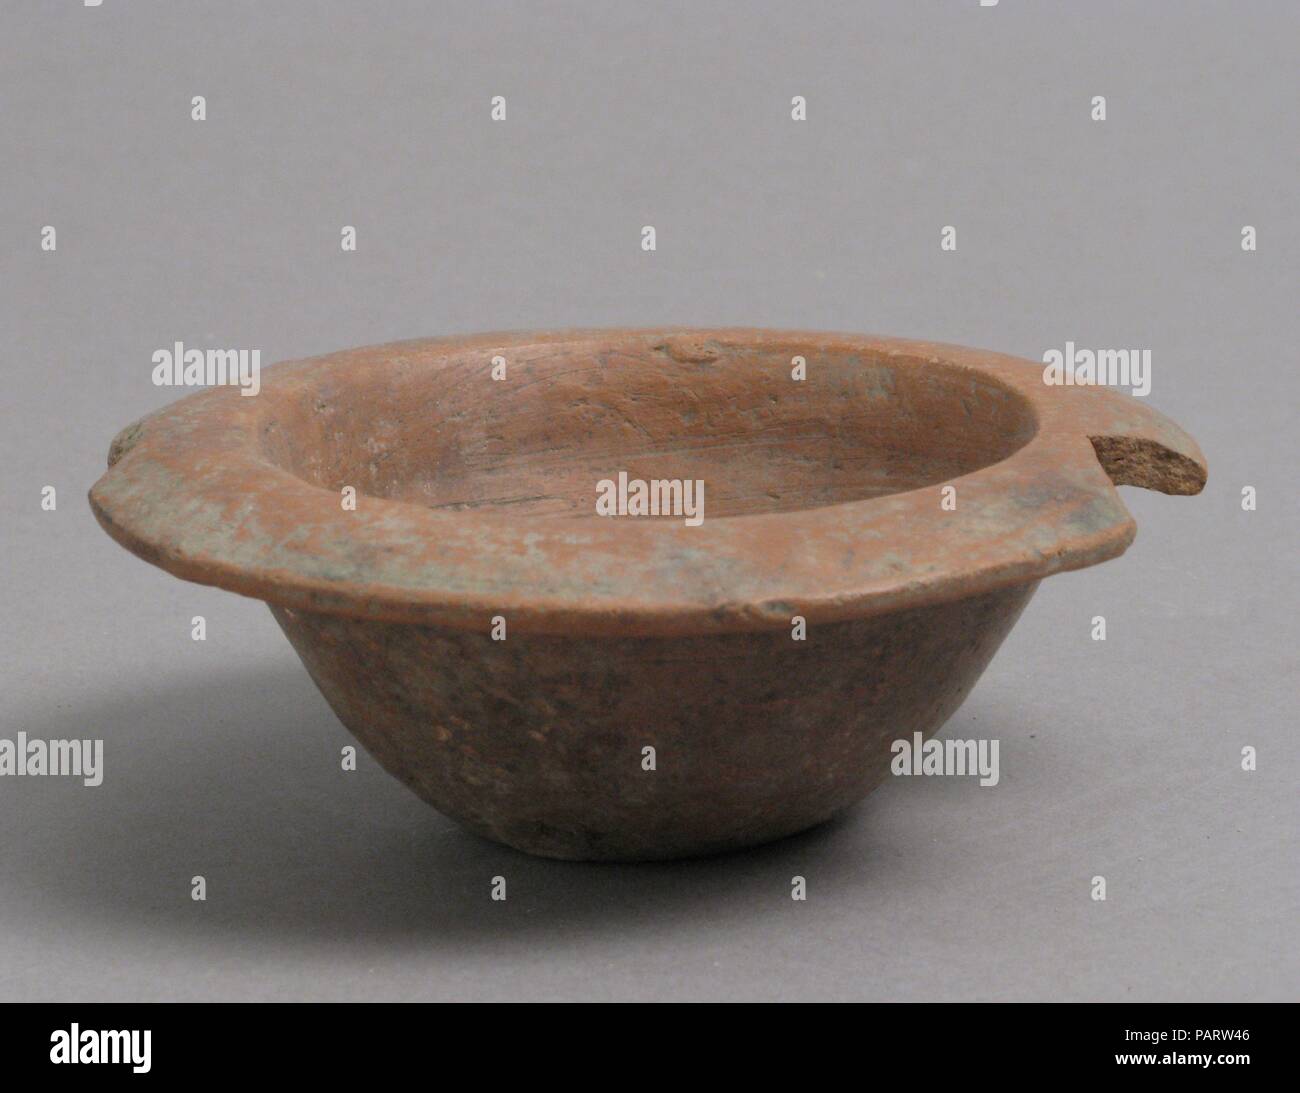 Bowl. Culture: Coptic. Dimensions: Overall: 1 7/16 x 3 7/8 in. (3.6 x 9.9 cm). Date: 4th-7th century. Museum: Metropolitan Museum of Art, New York, USA. Stock Photo